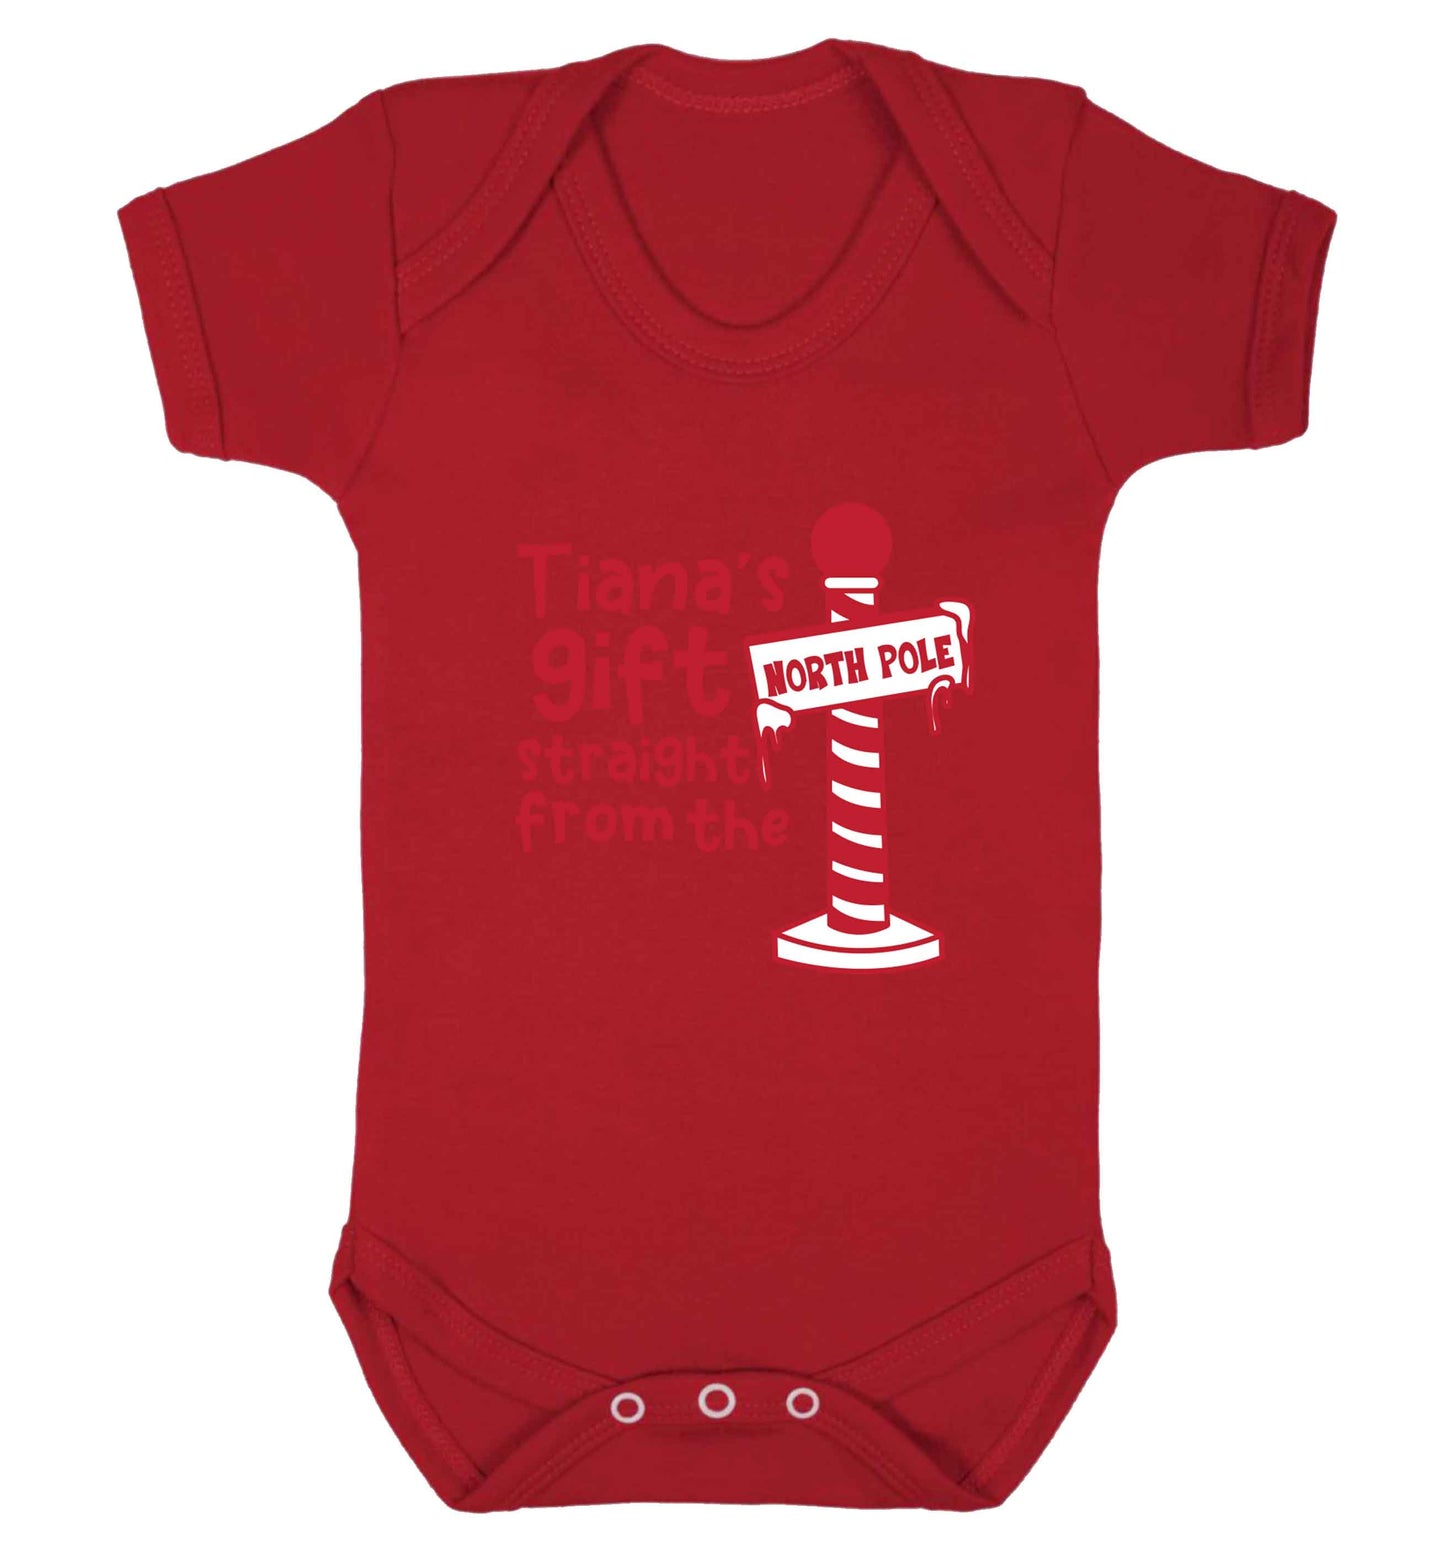 Merry Christmas baby vest red 18-24 months